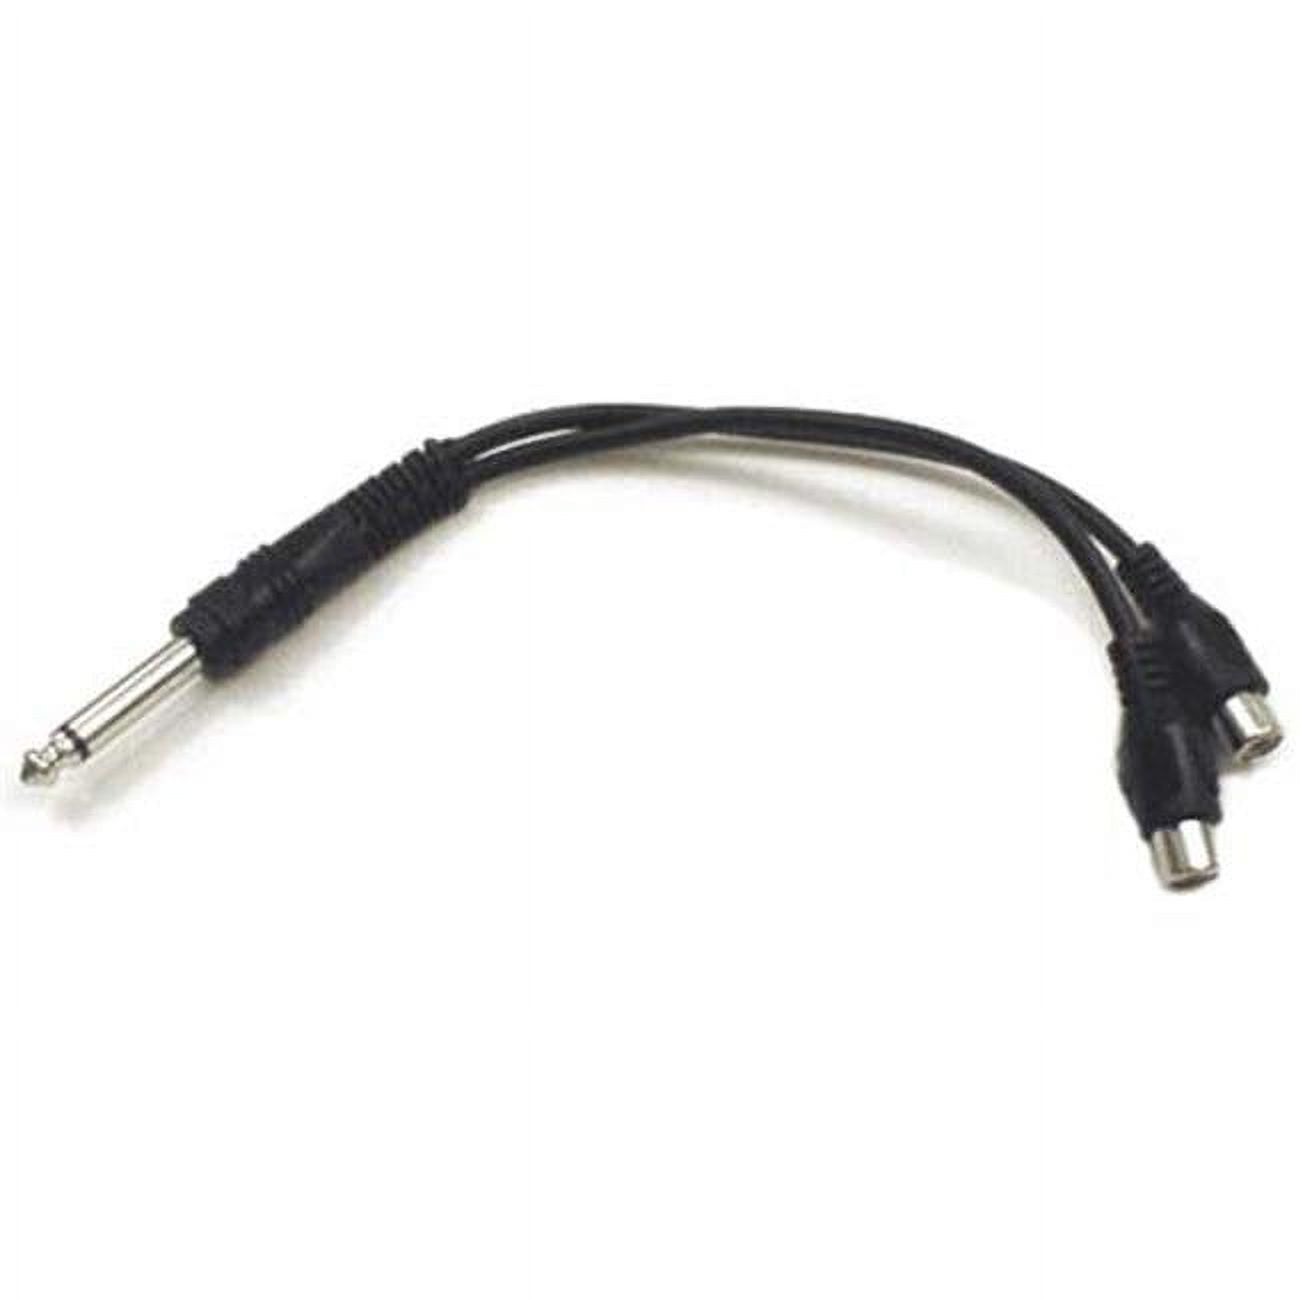 Hosa YPR-103 Y Audio Cable - for Audio Device - 6" - 1 x 6.35mm Male Audio - 2 x RCA Female Audio - image 1 of 2